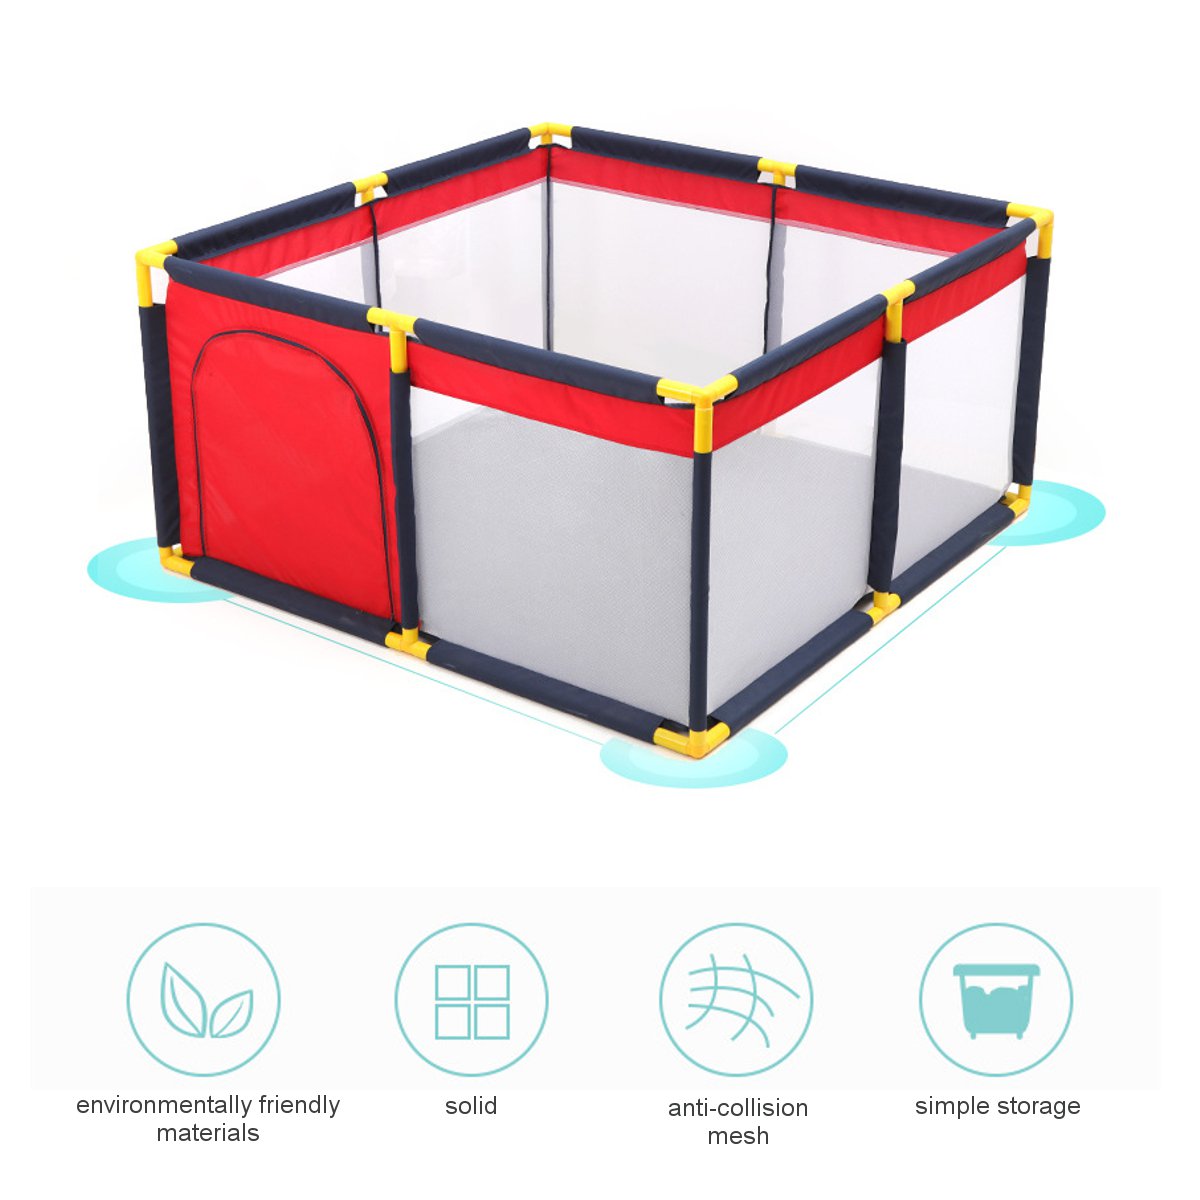 Baby-Playpen-Interactive-Safety-Indoor-Gate-Play-Yards-Tent-Court-Kids-Furniture-for-Children-Large--1688114-2